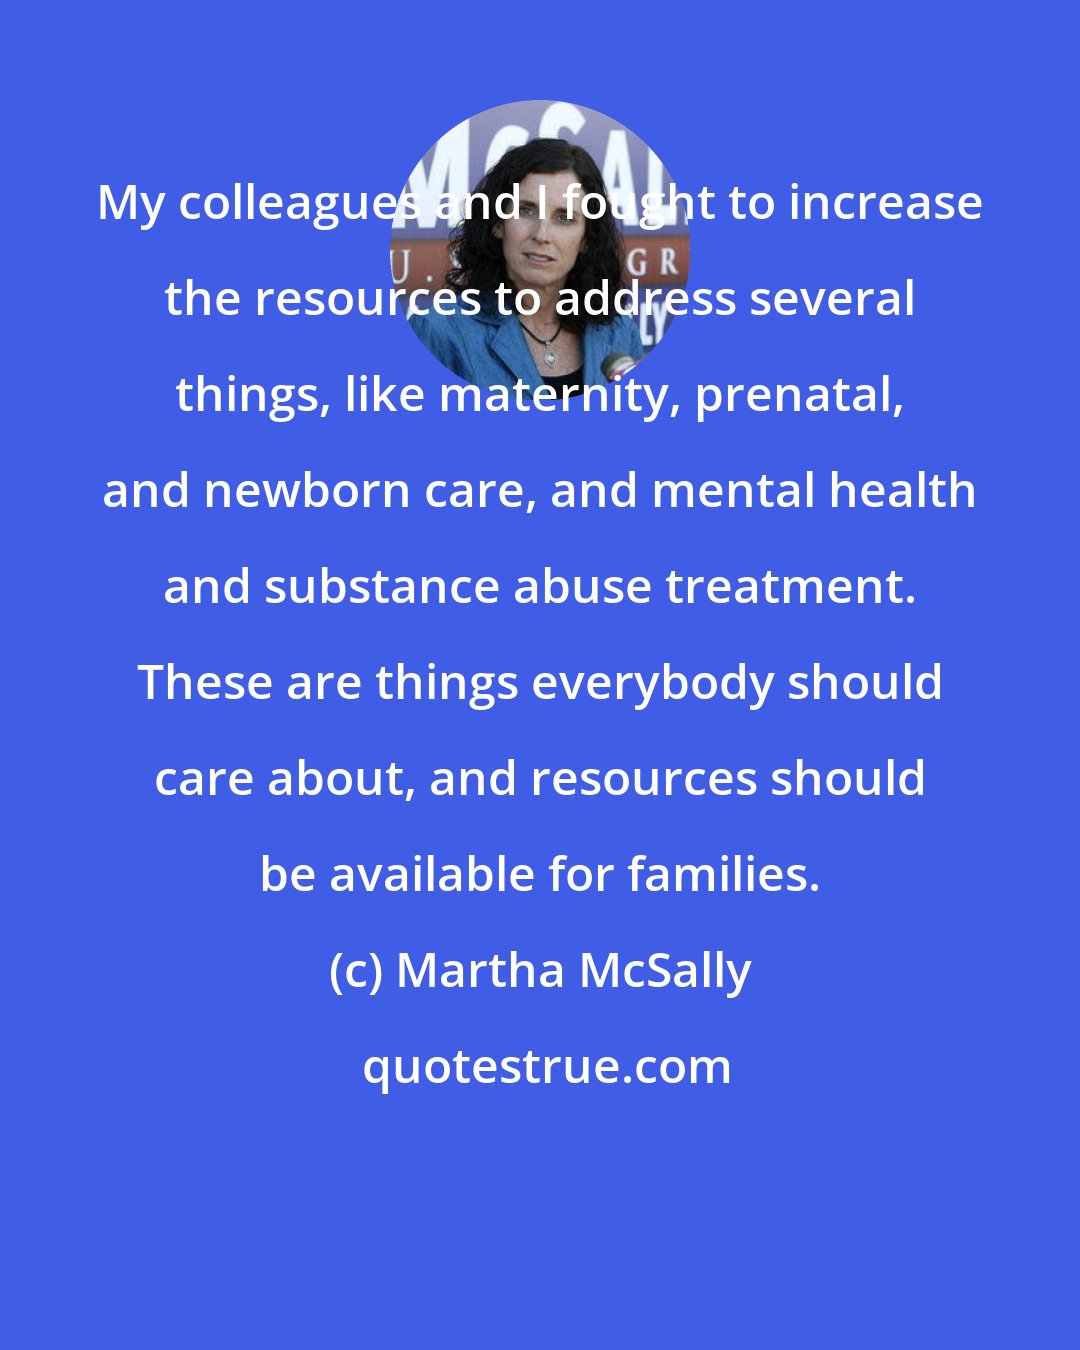 Martha McSally: My colleagues and I fought to increase the resources to address several things, like maternity, prenatal, and newborn care, and mental health and substance abuse treatment. These are things everybody should care about, and resources should be available for families.